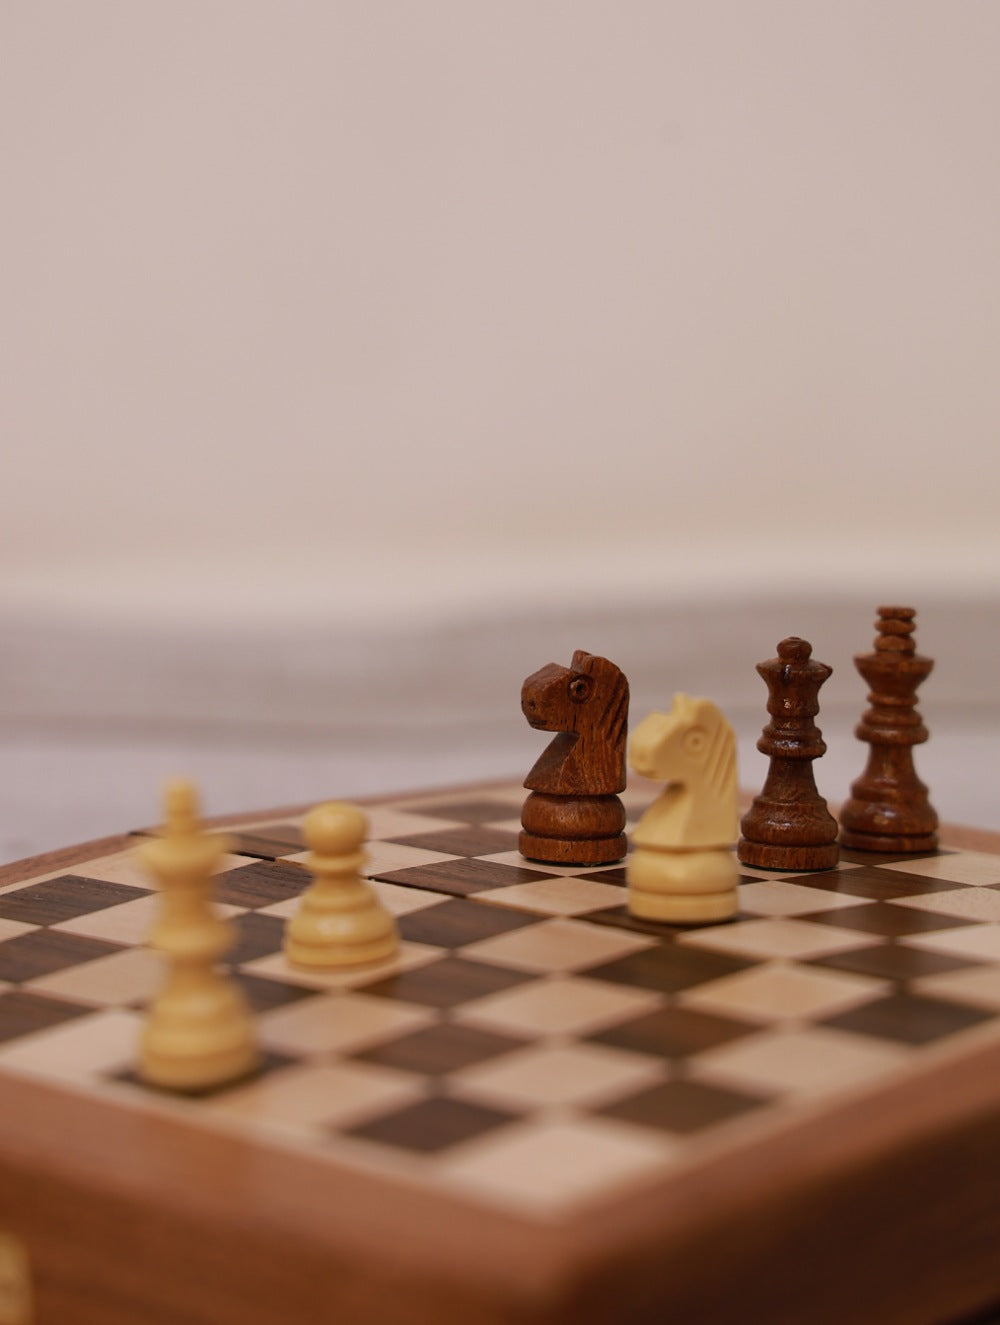 Load image into Gallery viewer, Handcrafted Wooden Travel Chess Set 